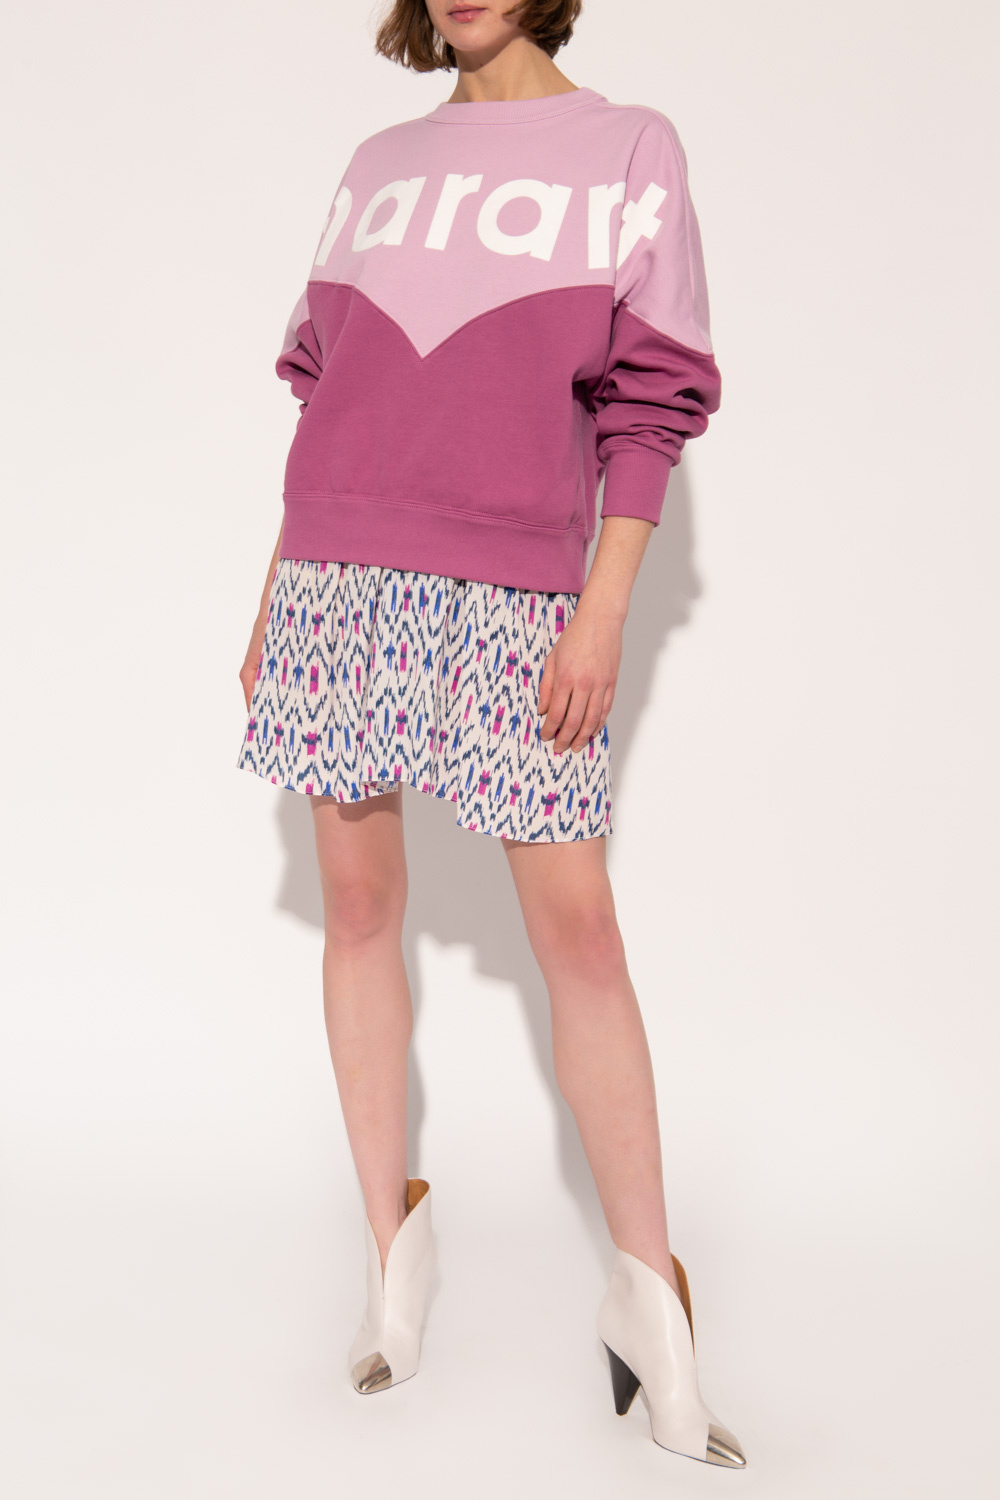 A STEP AHEAD IN STYLISH SHOES ‘Assia’ patterned skirt